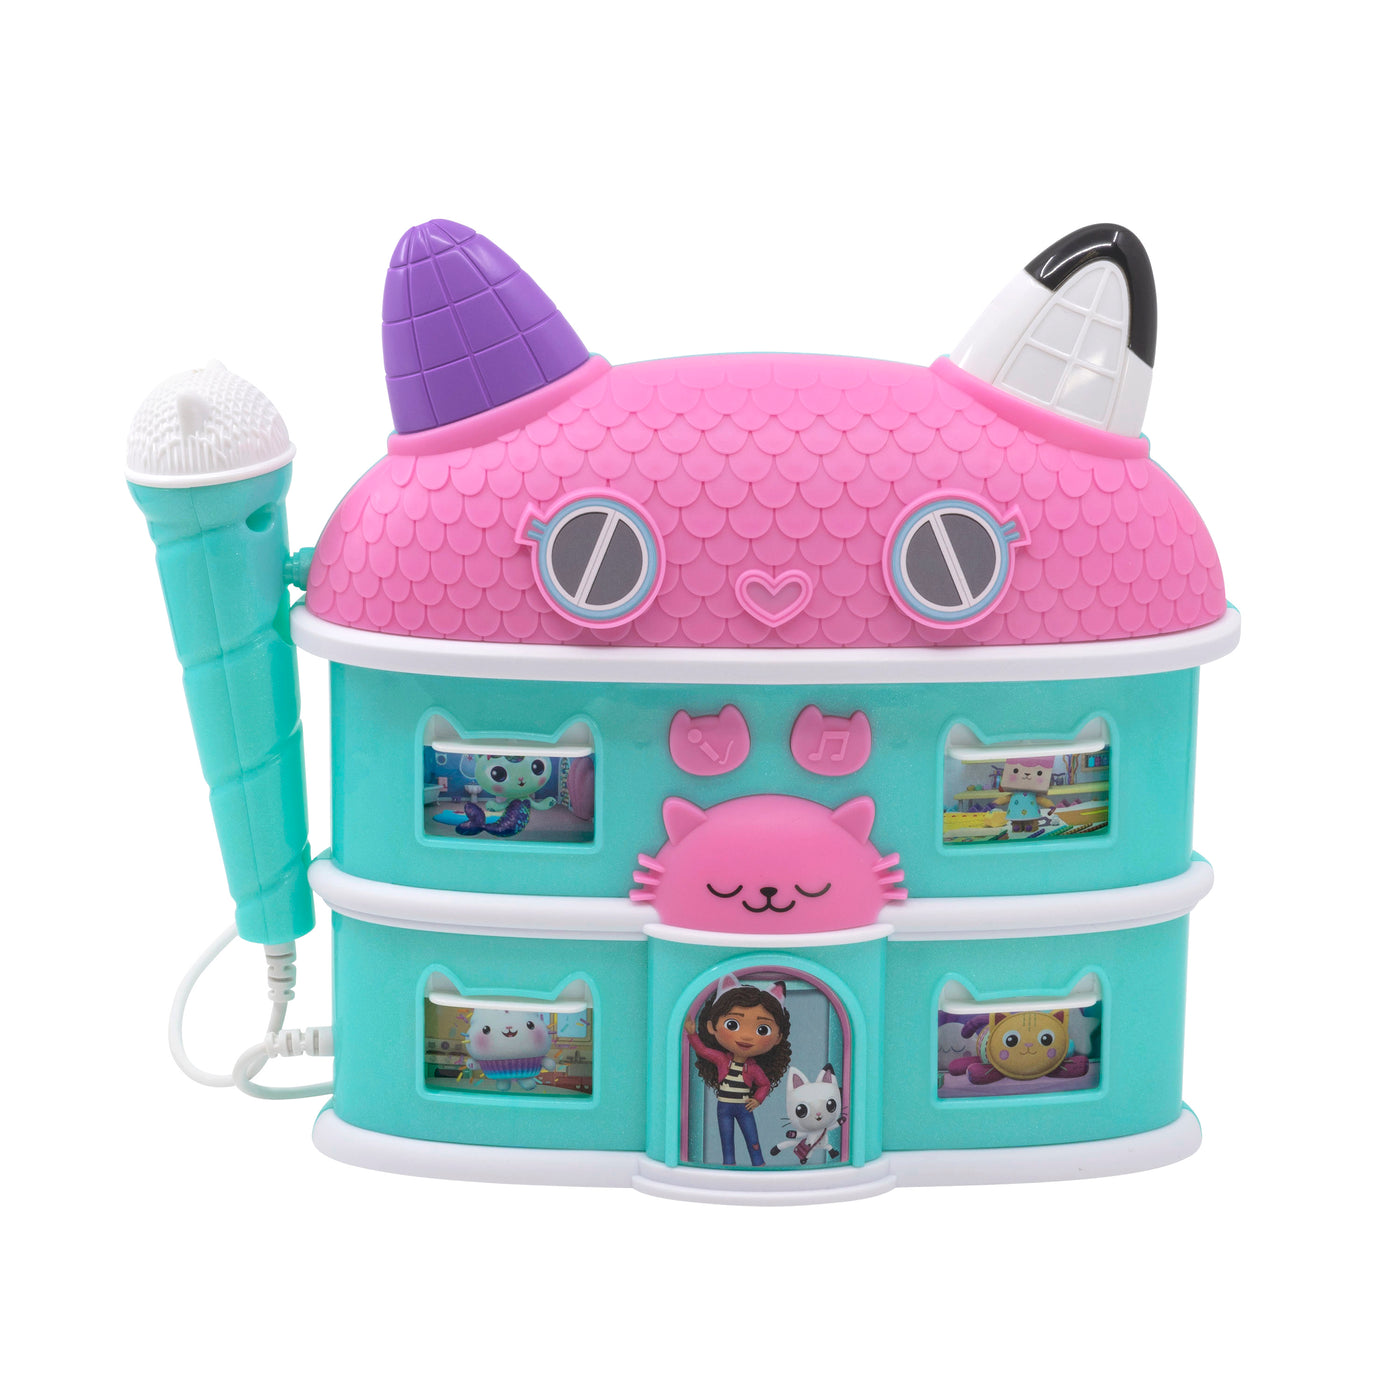 Gabbys Dollhouse Sing Along Boombox Toy for Kids